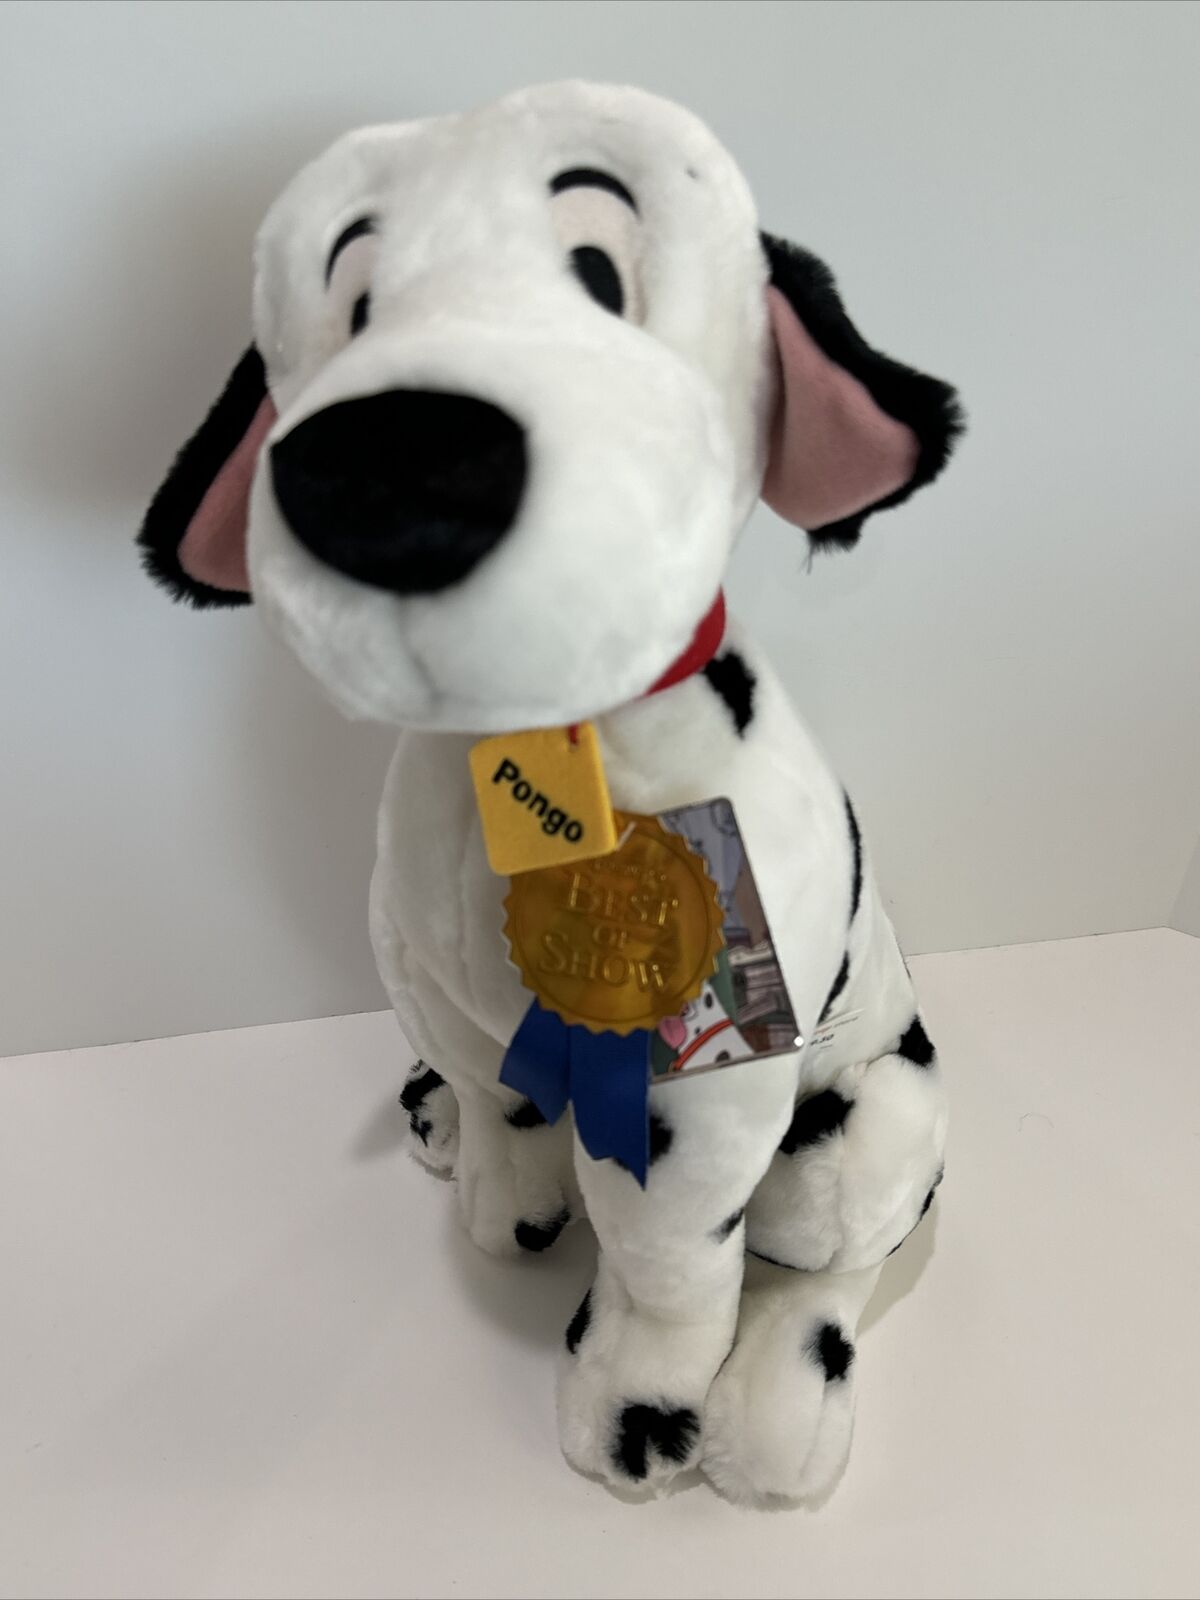 Disney Store Best Of Show 101 Dalmatians Pongo the Dog 16” Tall Plush - w/ Tags